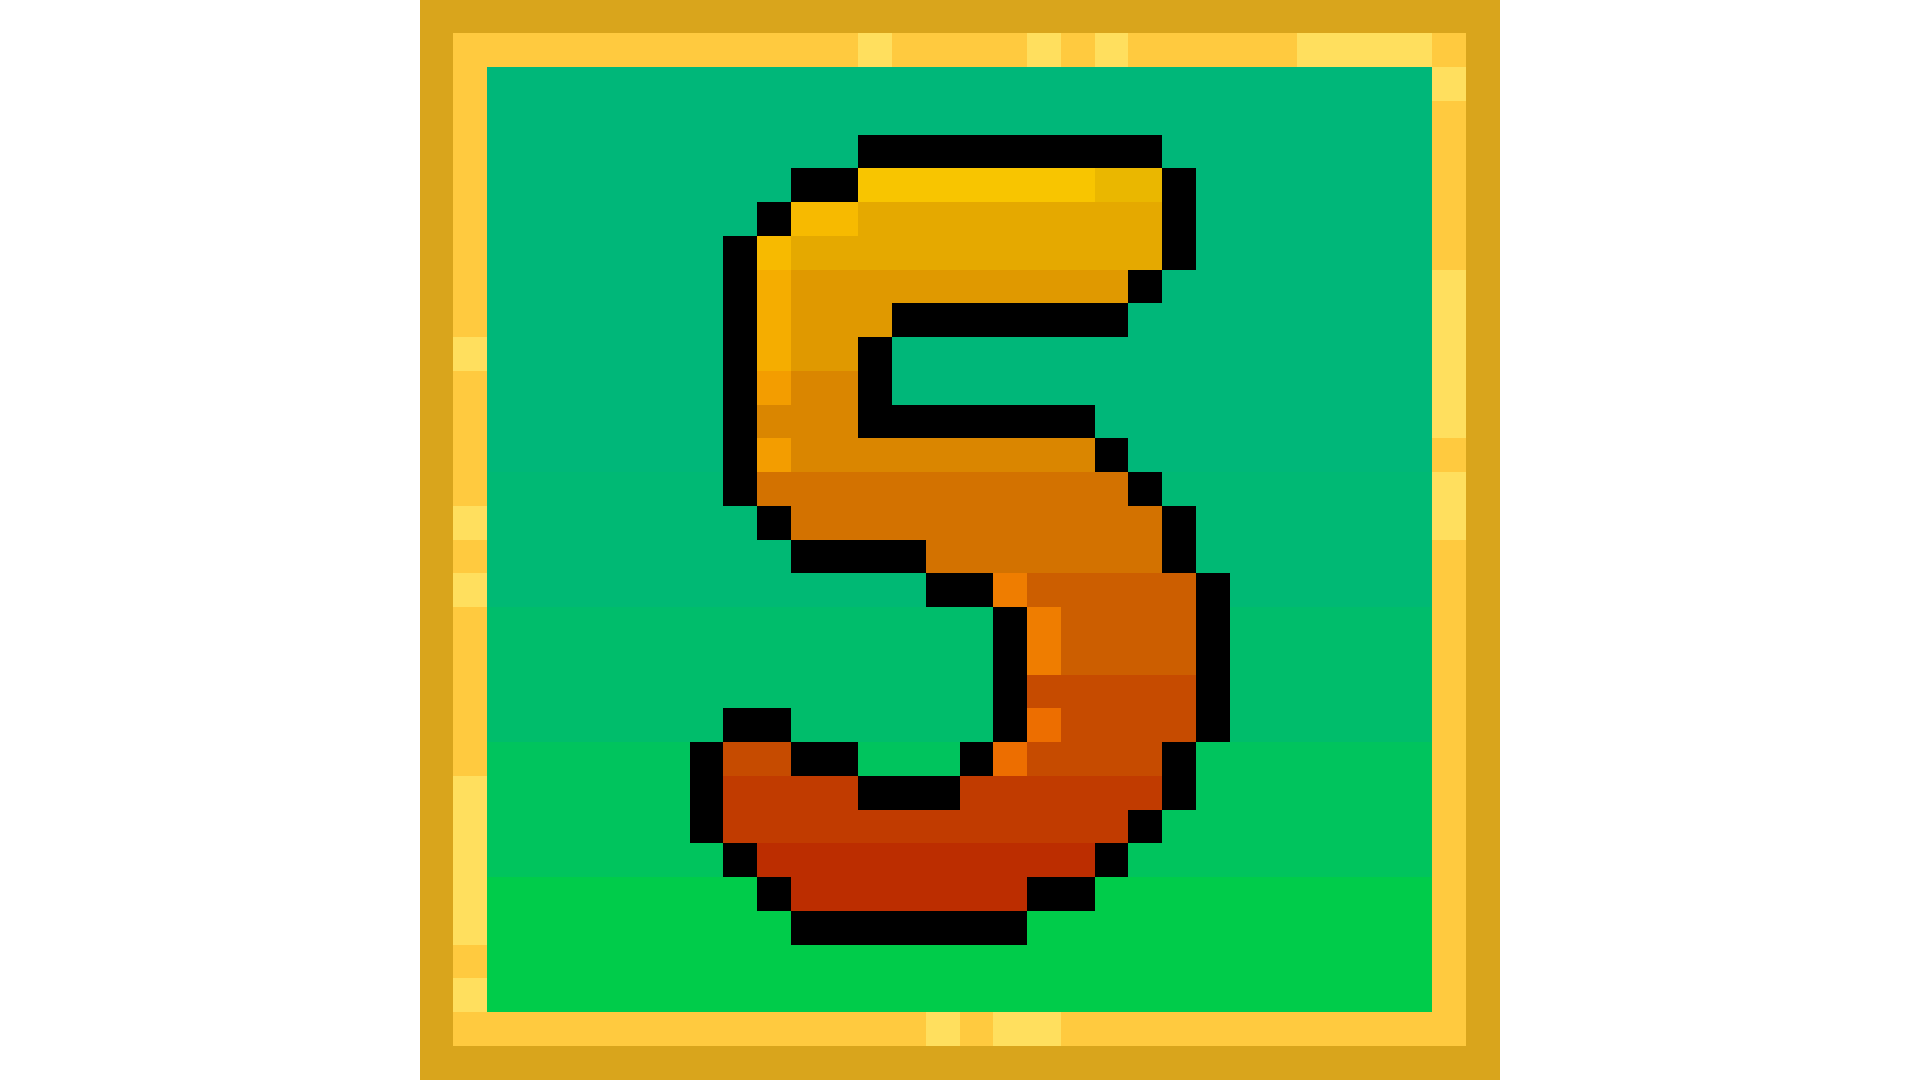 Icon for World 5